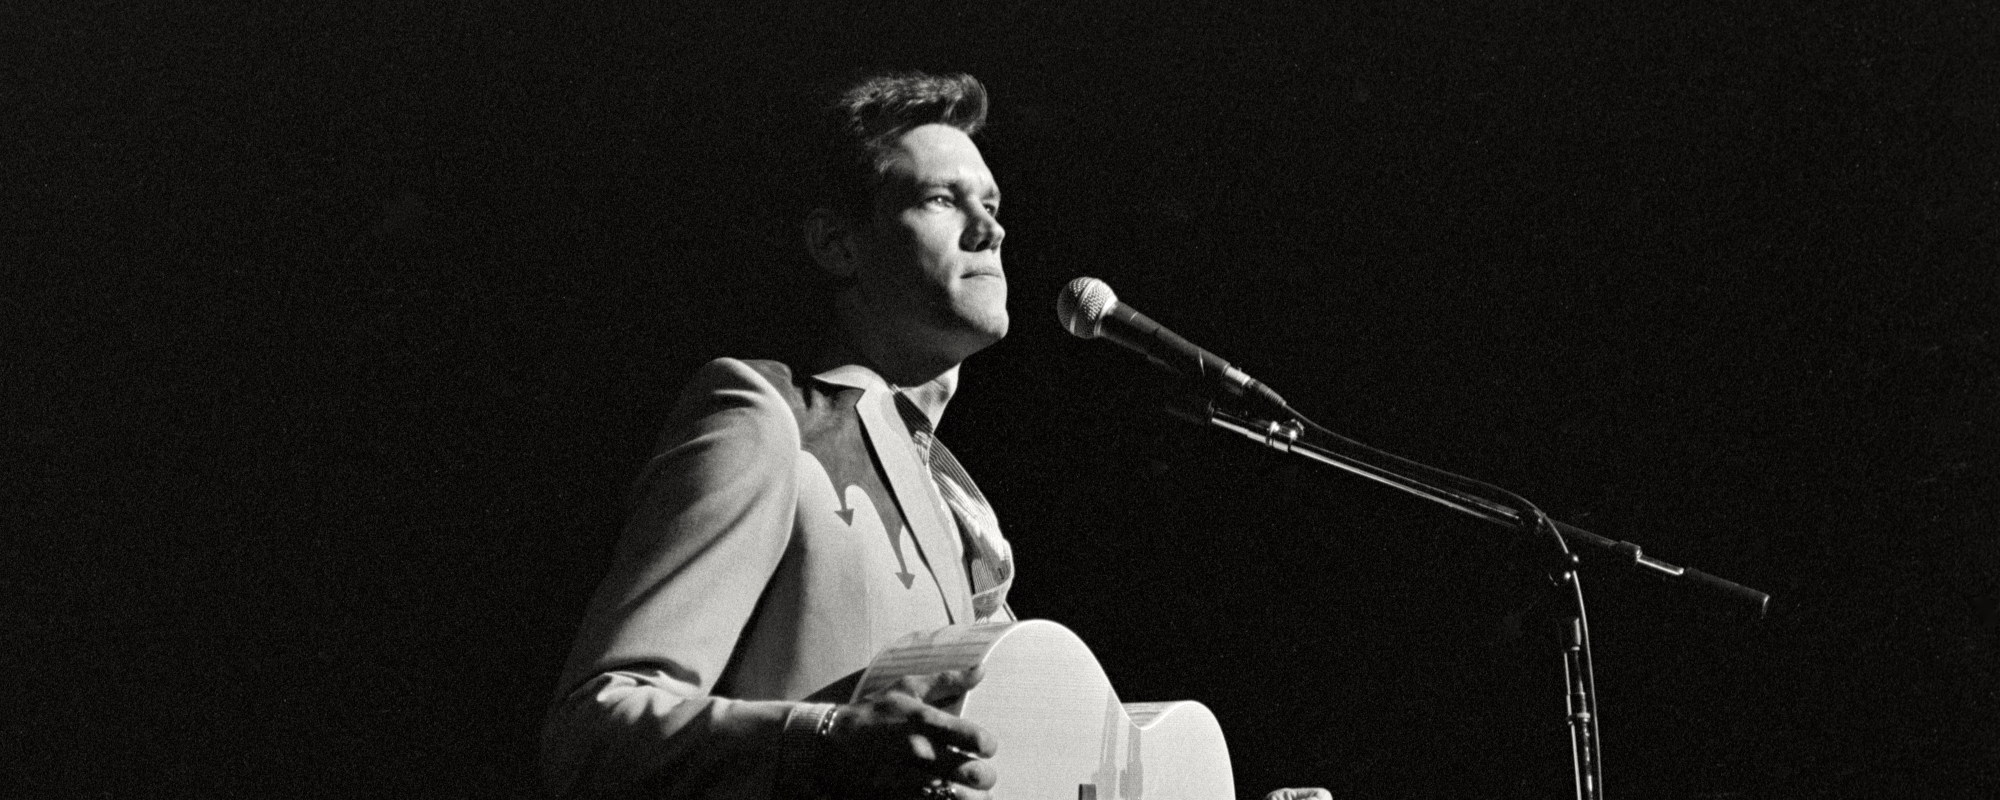 The Hard Luck Story Behind Randy Travis’ “Forever and Ever Amen”